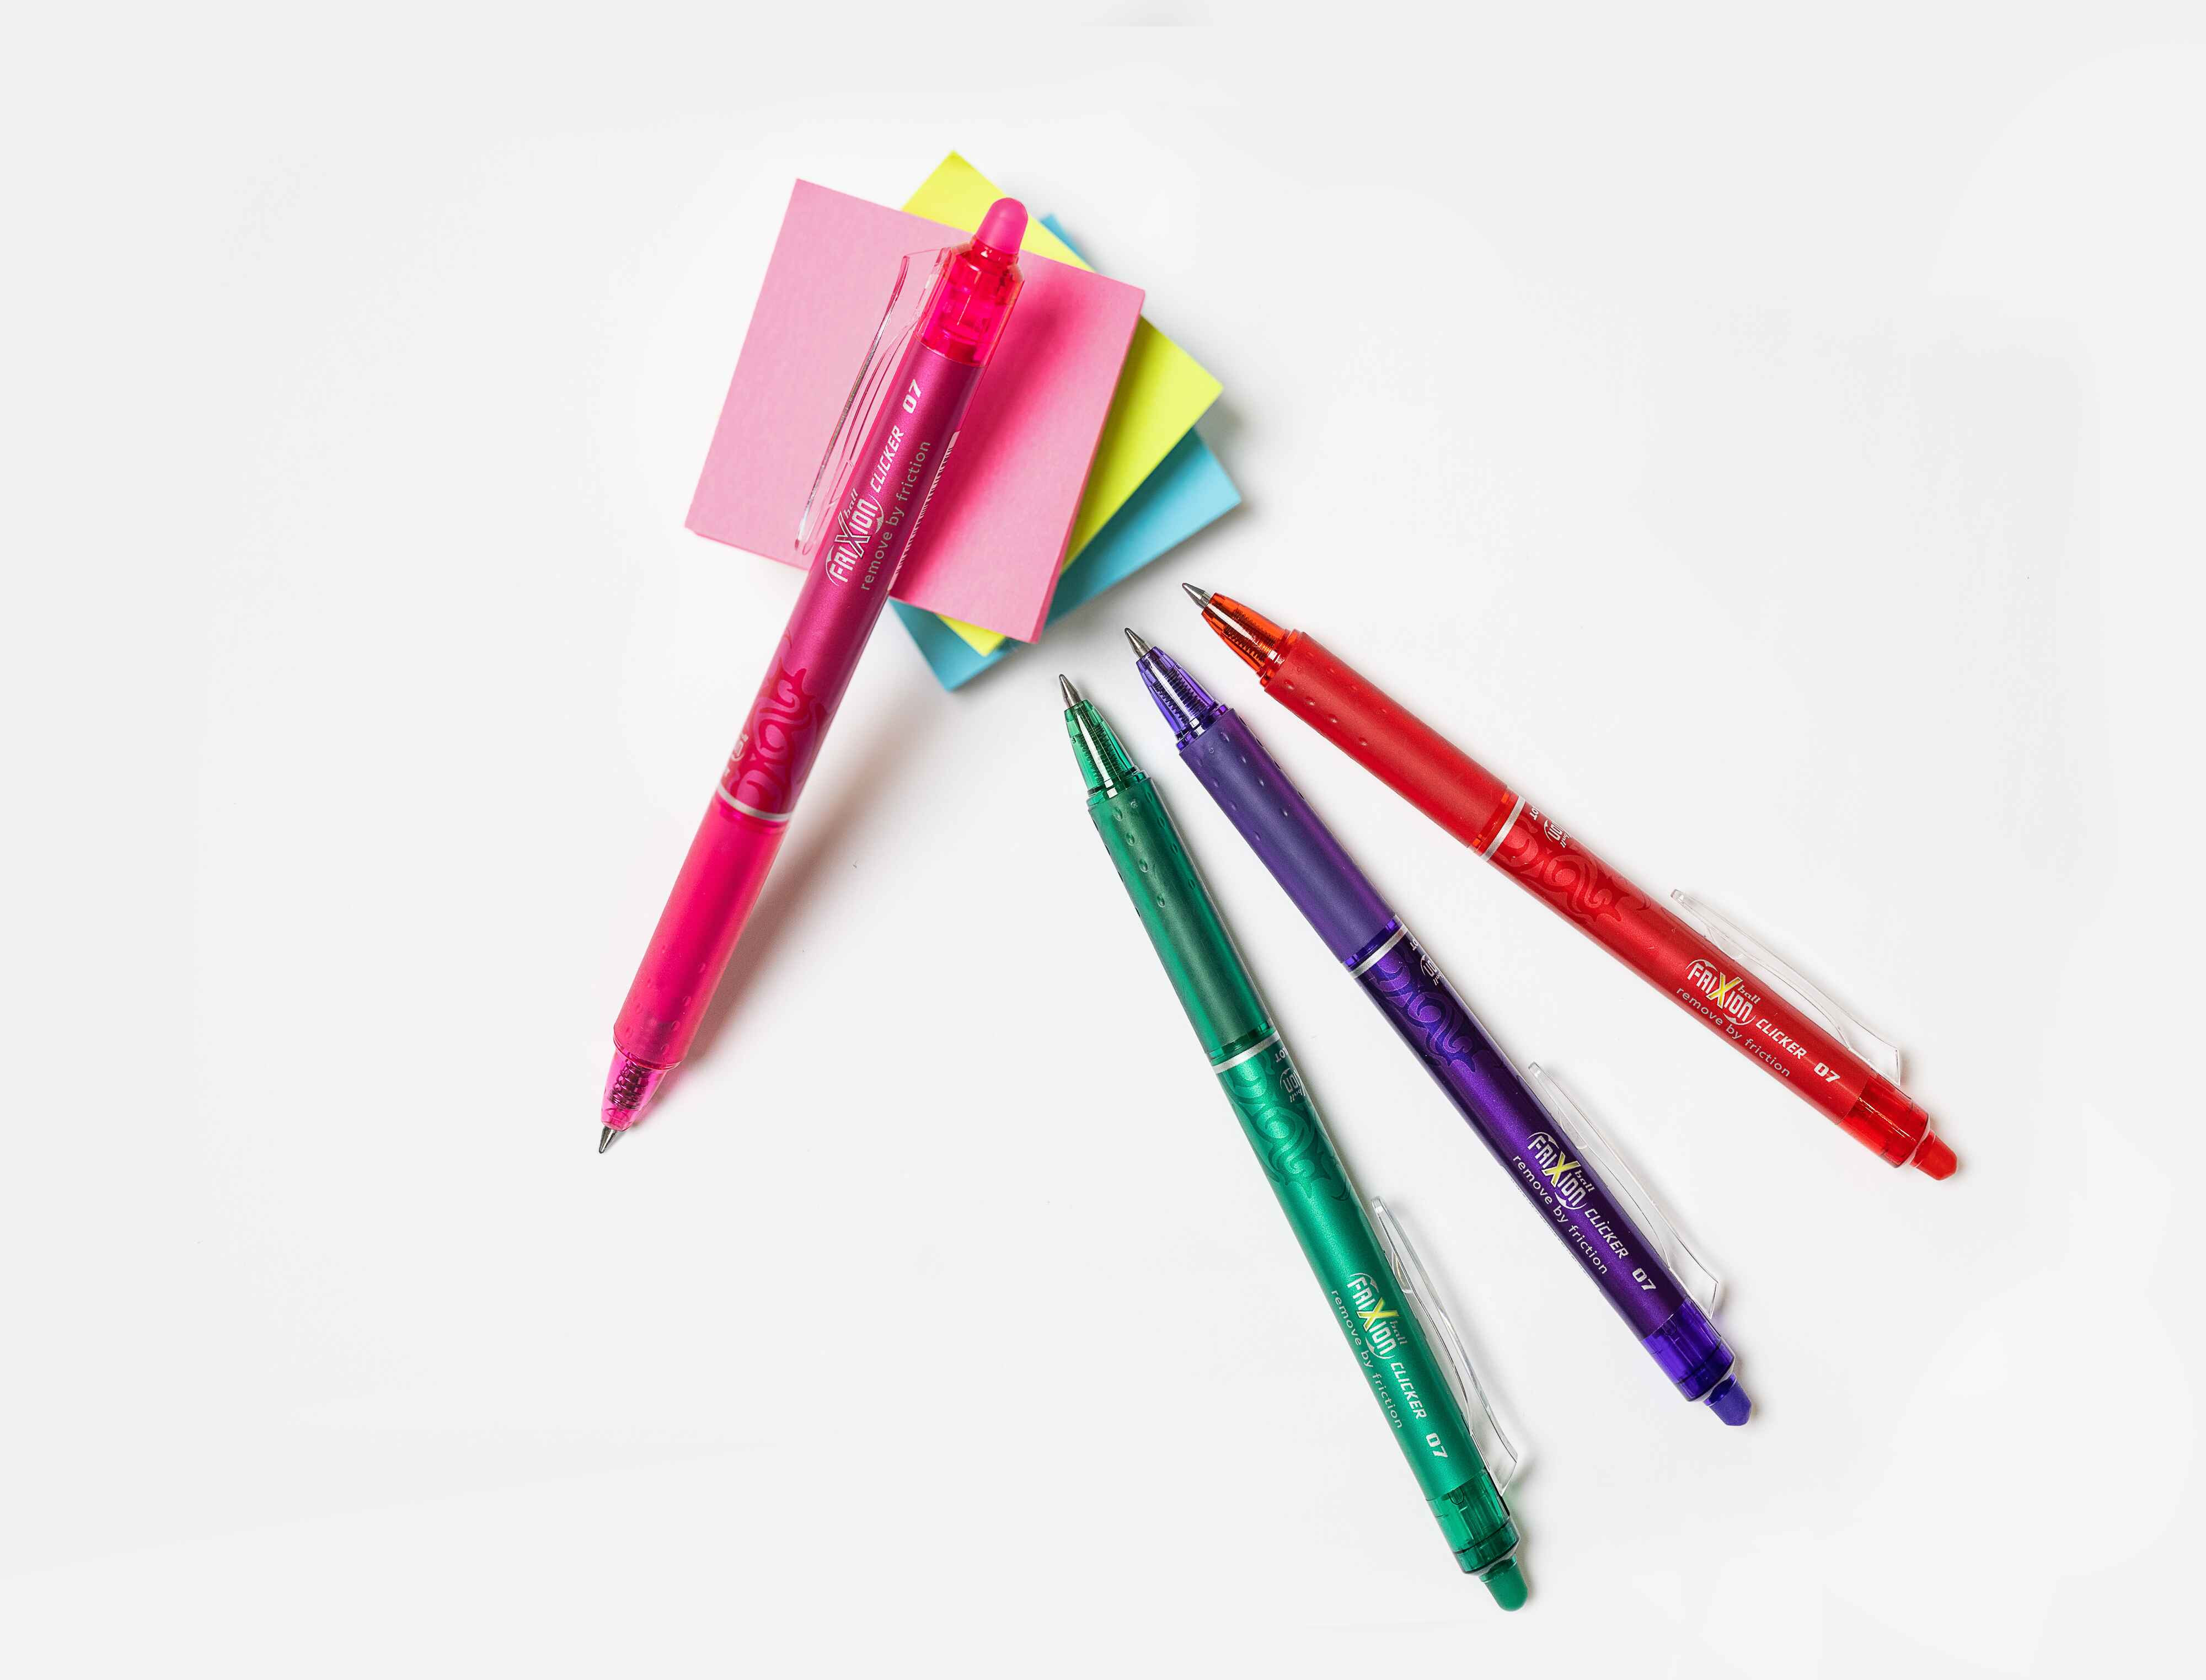 A selection of different coloured refillable FriXion Clicker pens and a post-it pad arranged on a white surface.